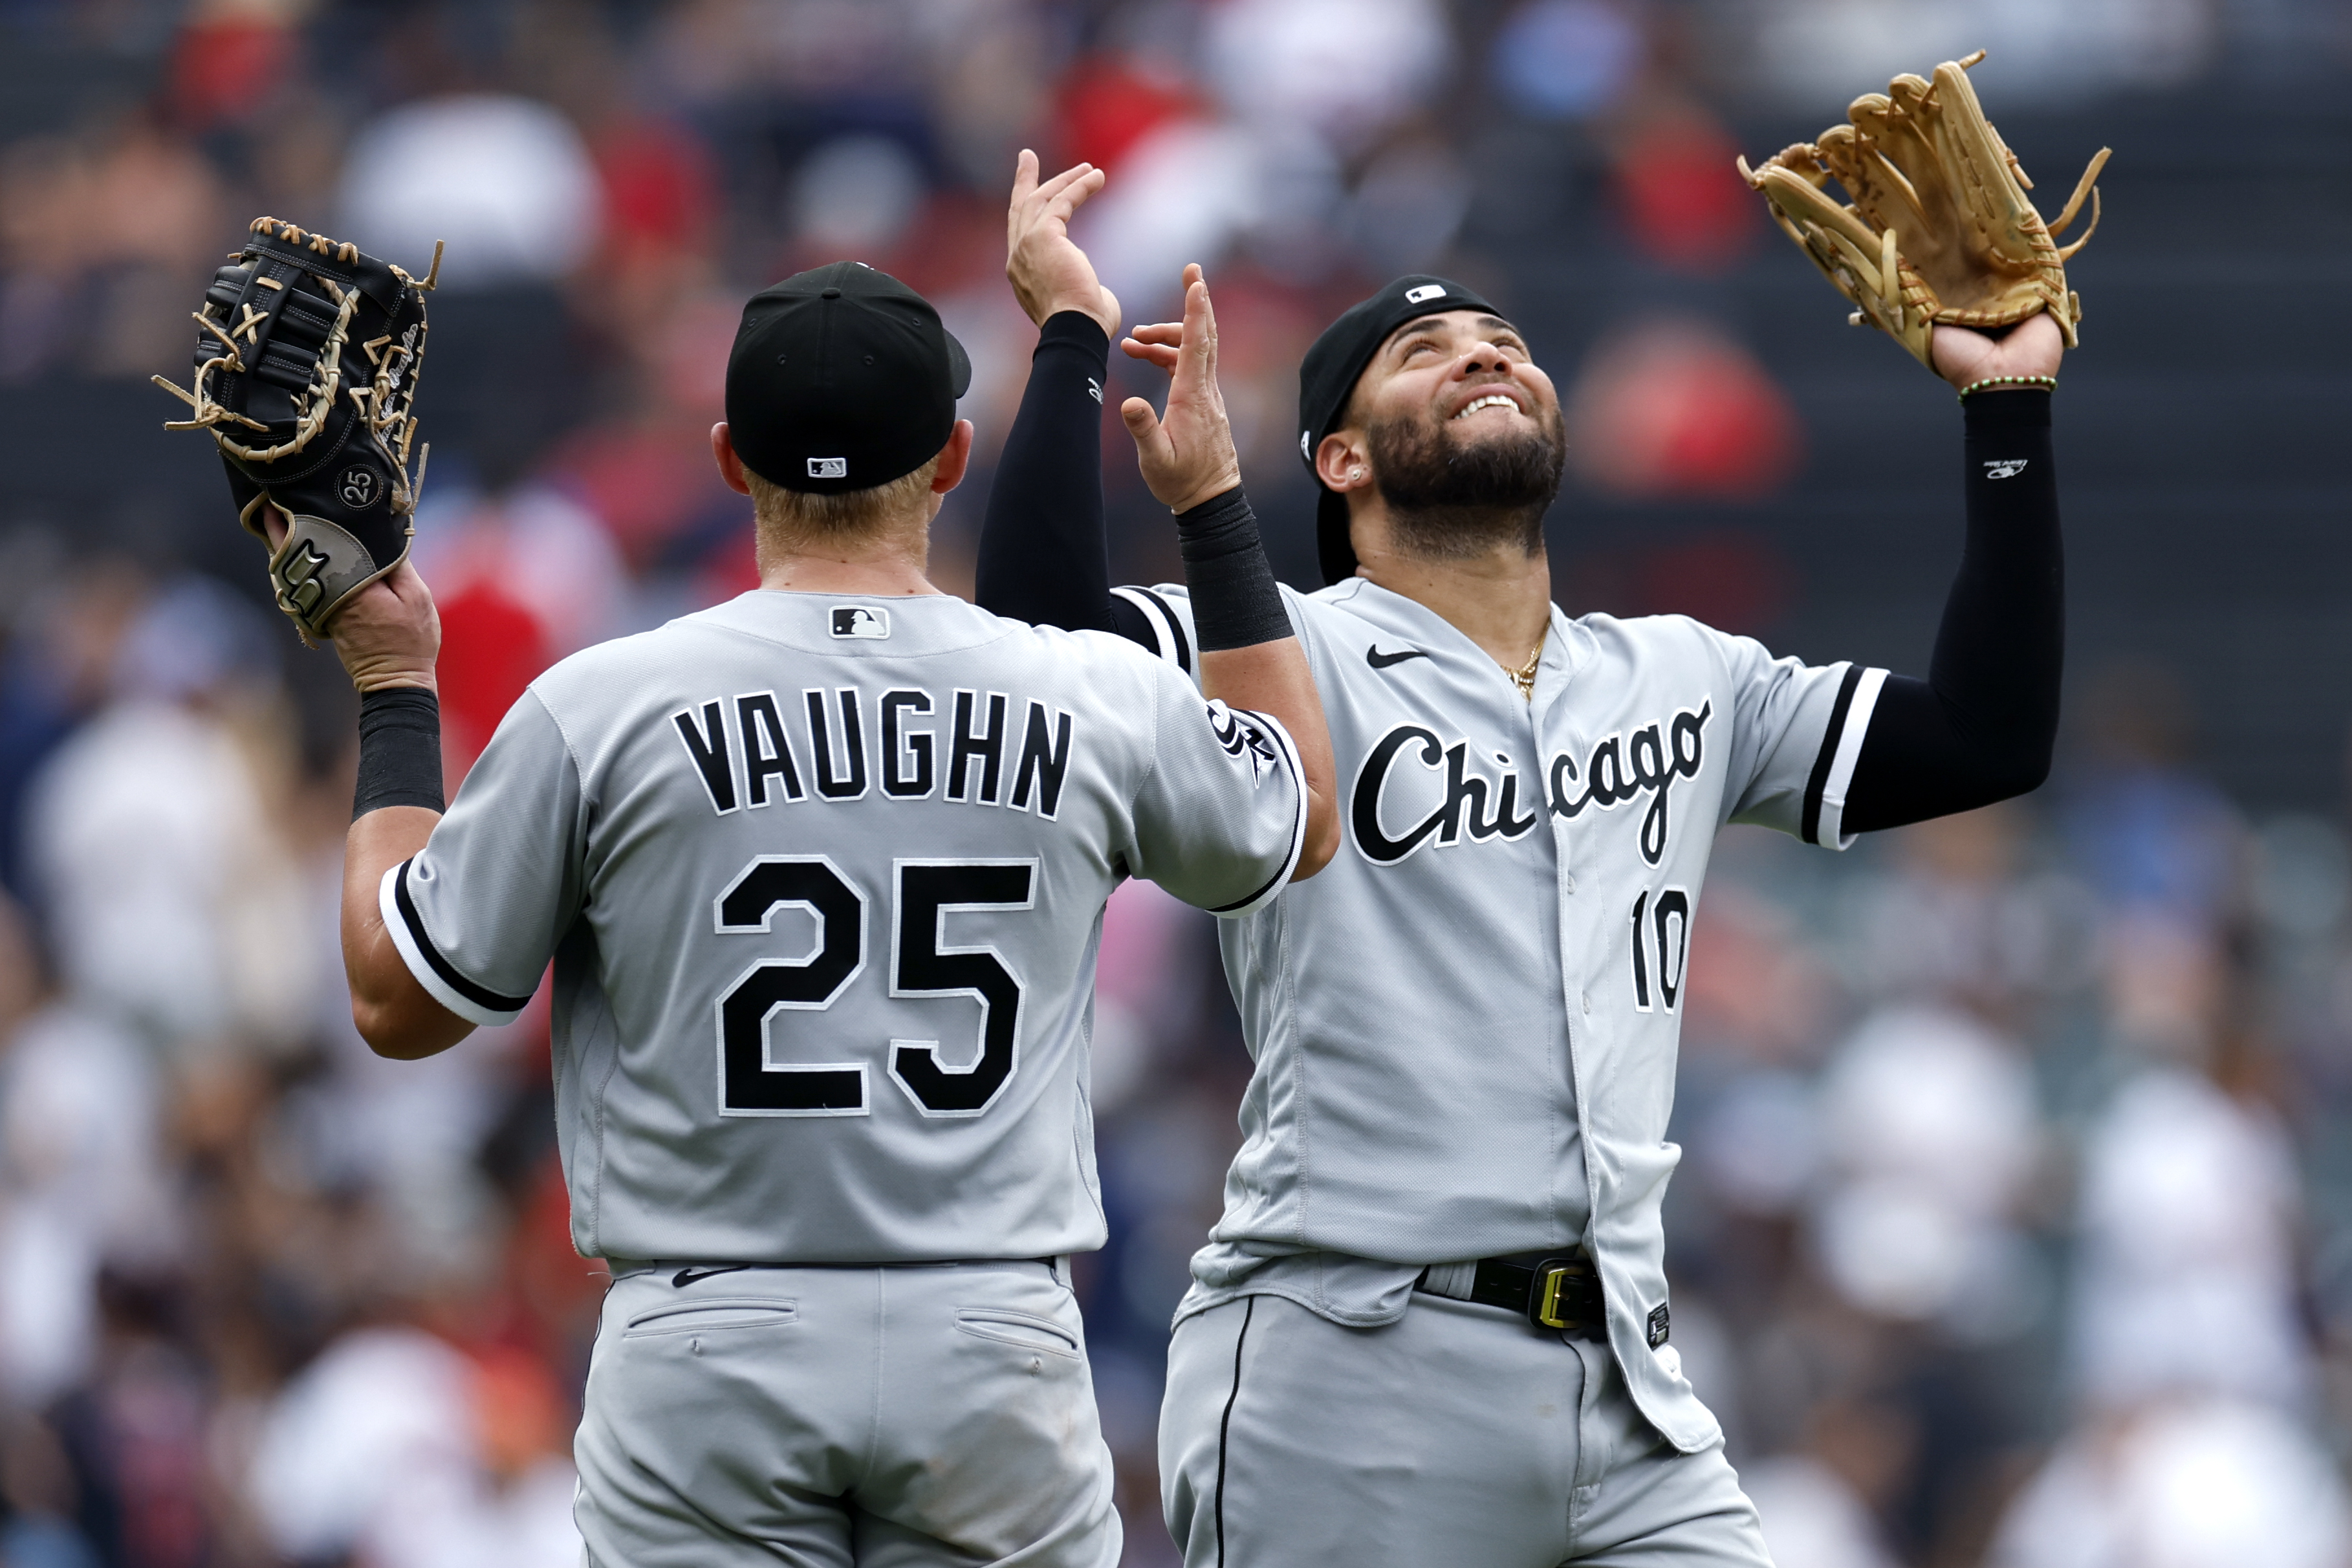 White Sox Giveaways and Promotions (2023) - Good Sports Talk